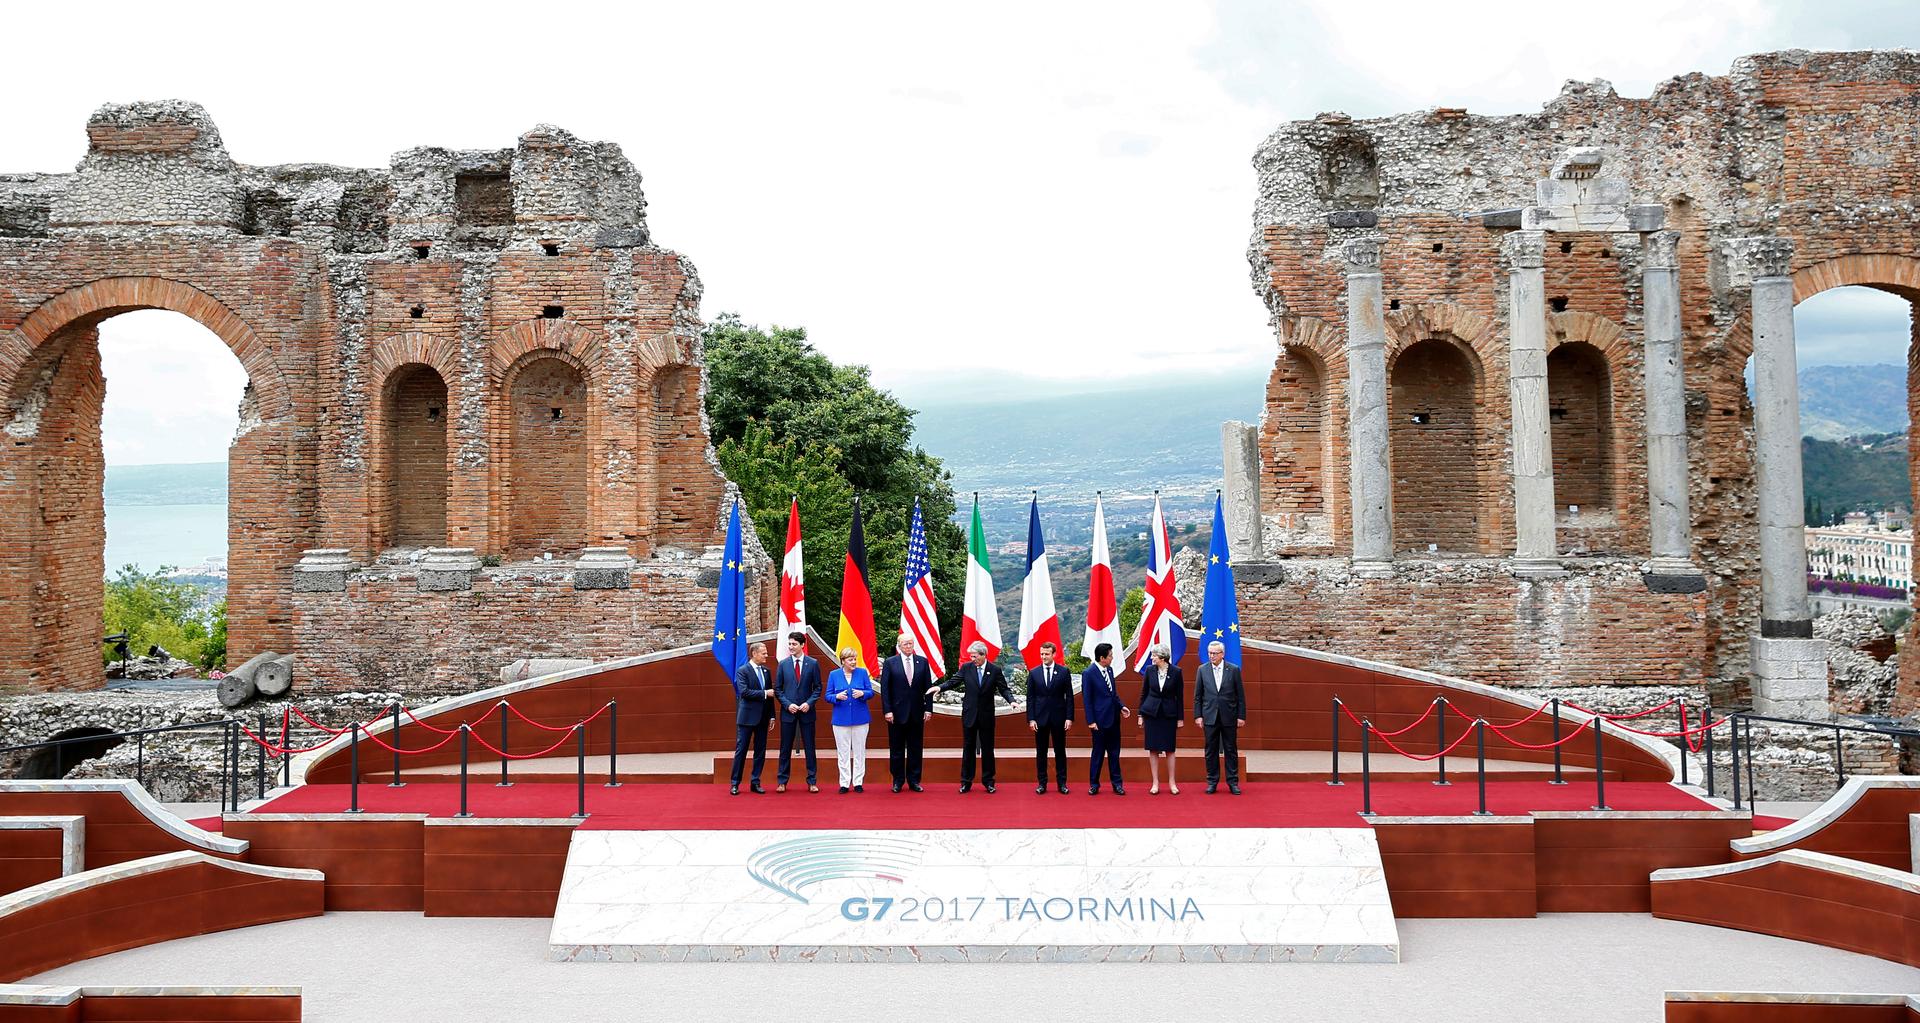 Meeting of the G7 Summit in Taormina, Sicily, Italy, May 26, 2017. 